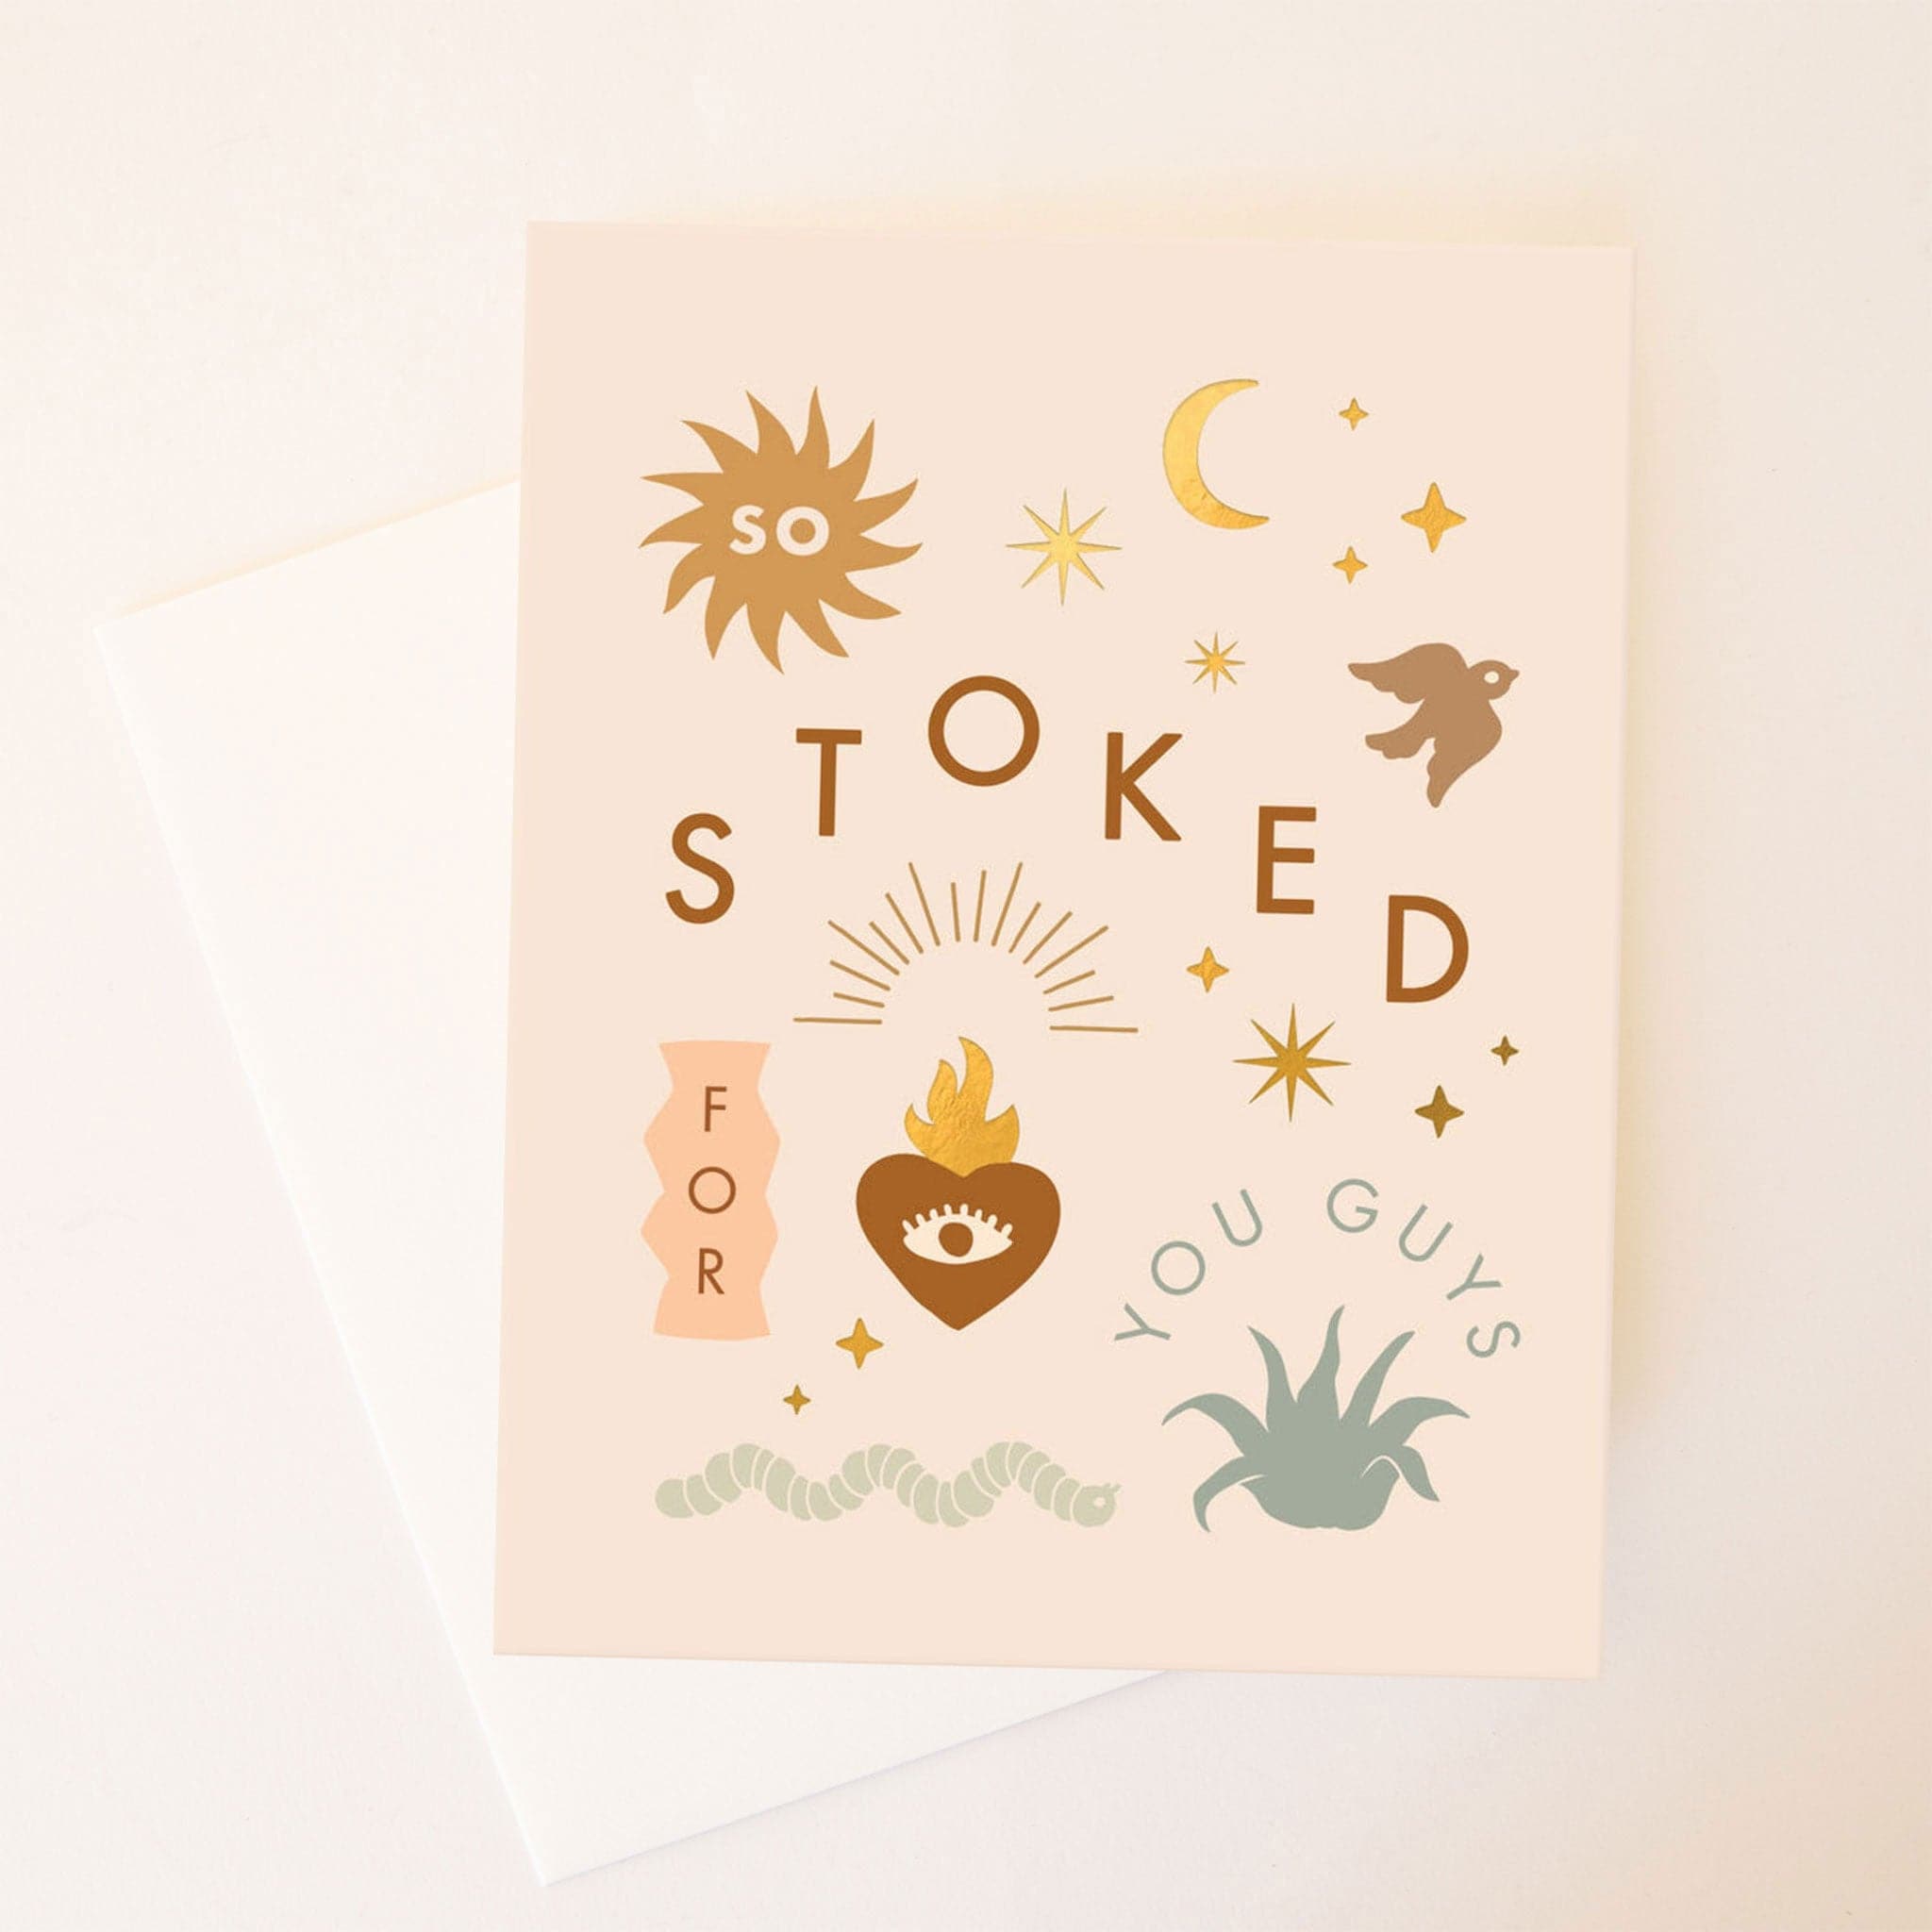 A super light blush pink card with a bunch of individual graphics on the front including a sparrow, a sun, moon and stars, an aloe plant, and a snake along with words spiratcally placed next to or inside of the graphic and reads, "So Stoked For You Guys". Also included is a white envelope.